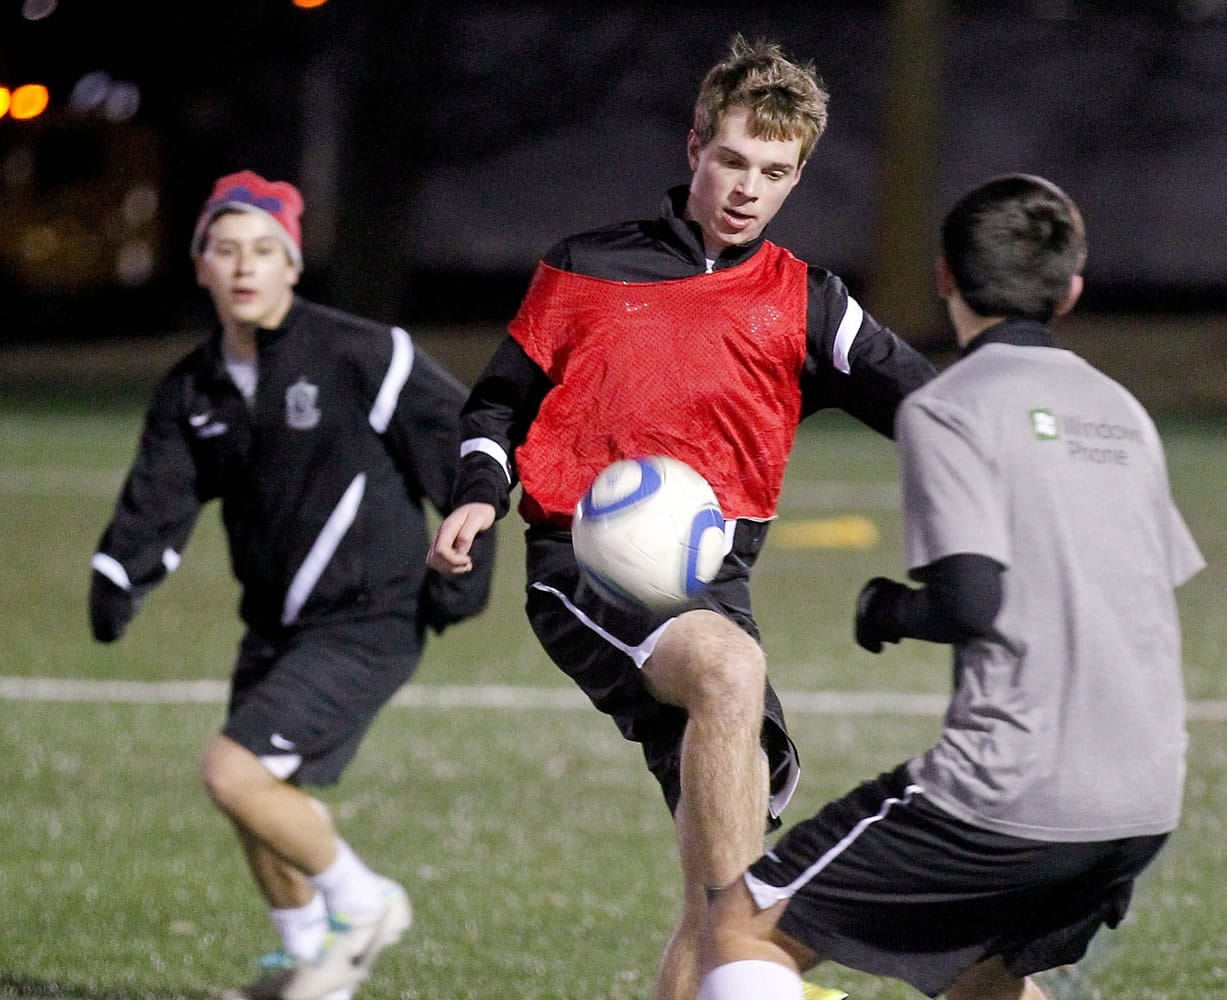 Sam Schneider, left, practices with his U16-9798 Premiere club soccer team at St. Louis Soccer Park in St.